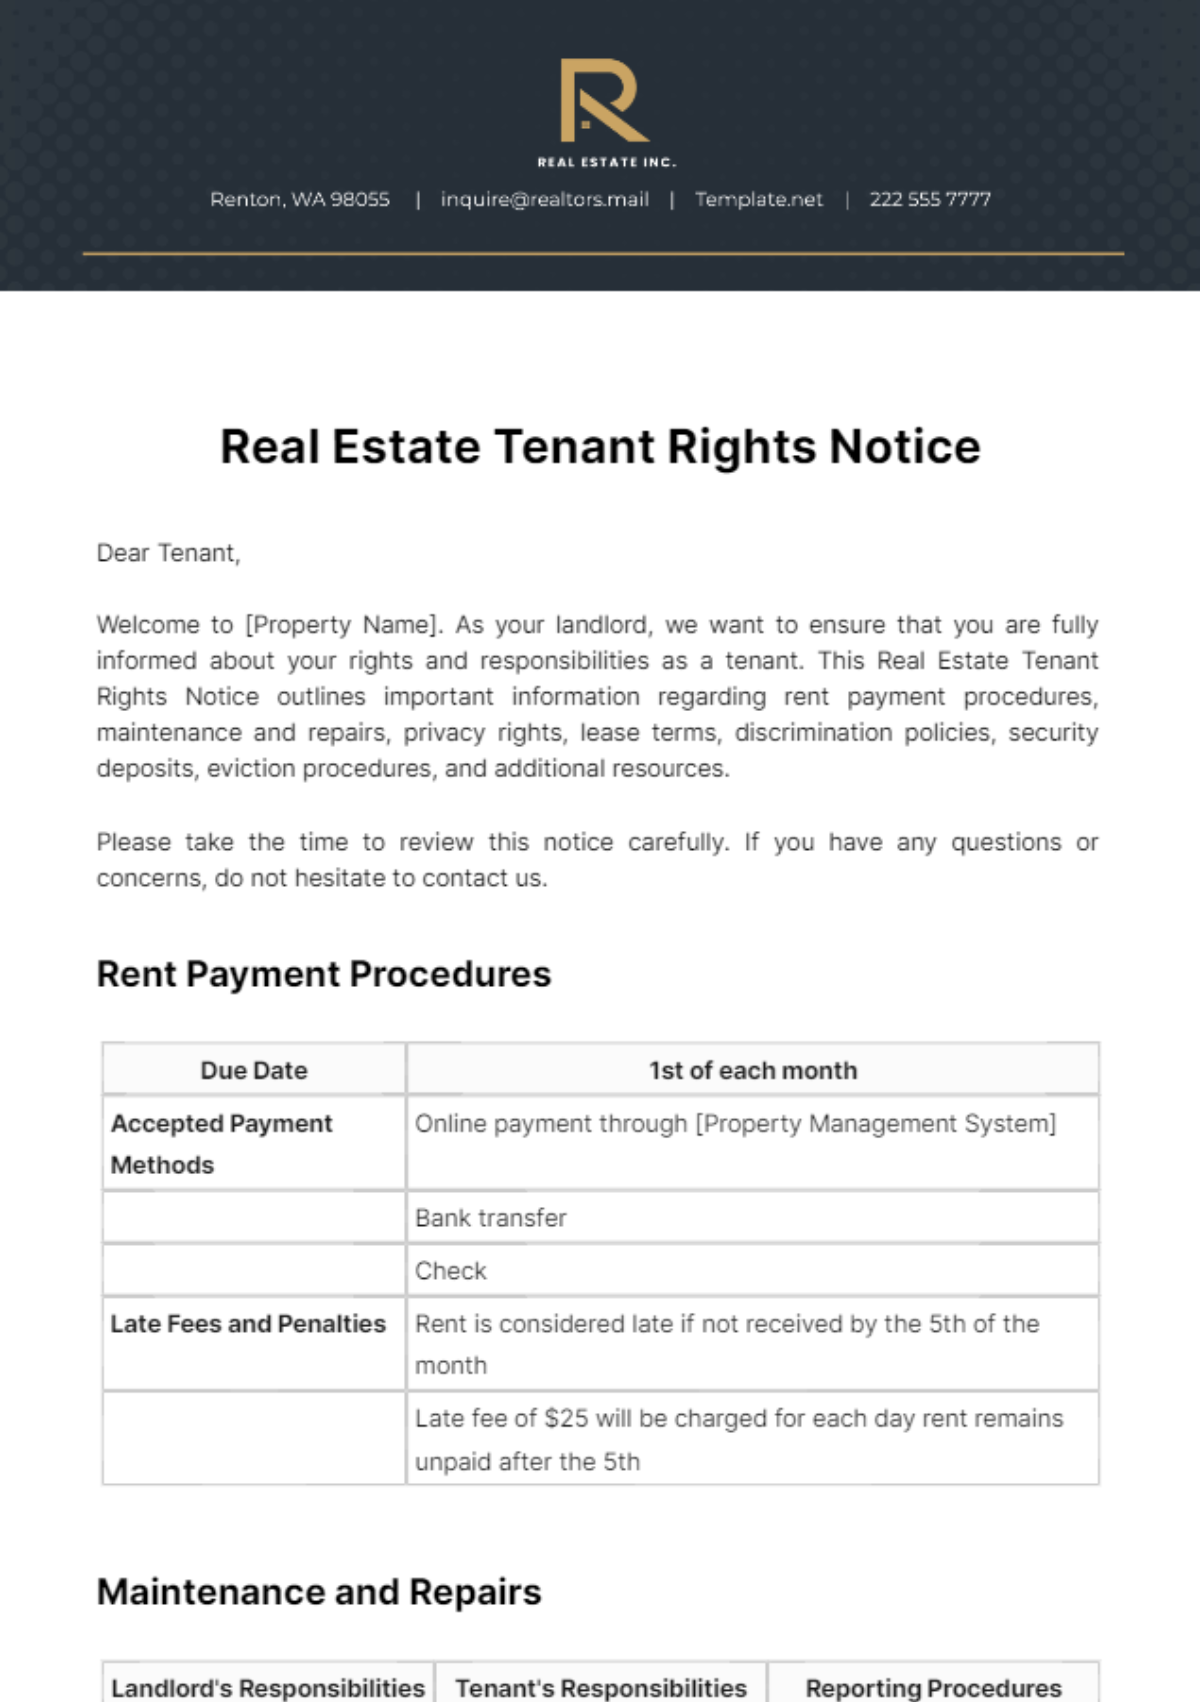 Real Estate Tenant Rights Notice Template